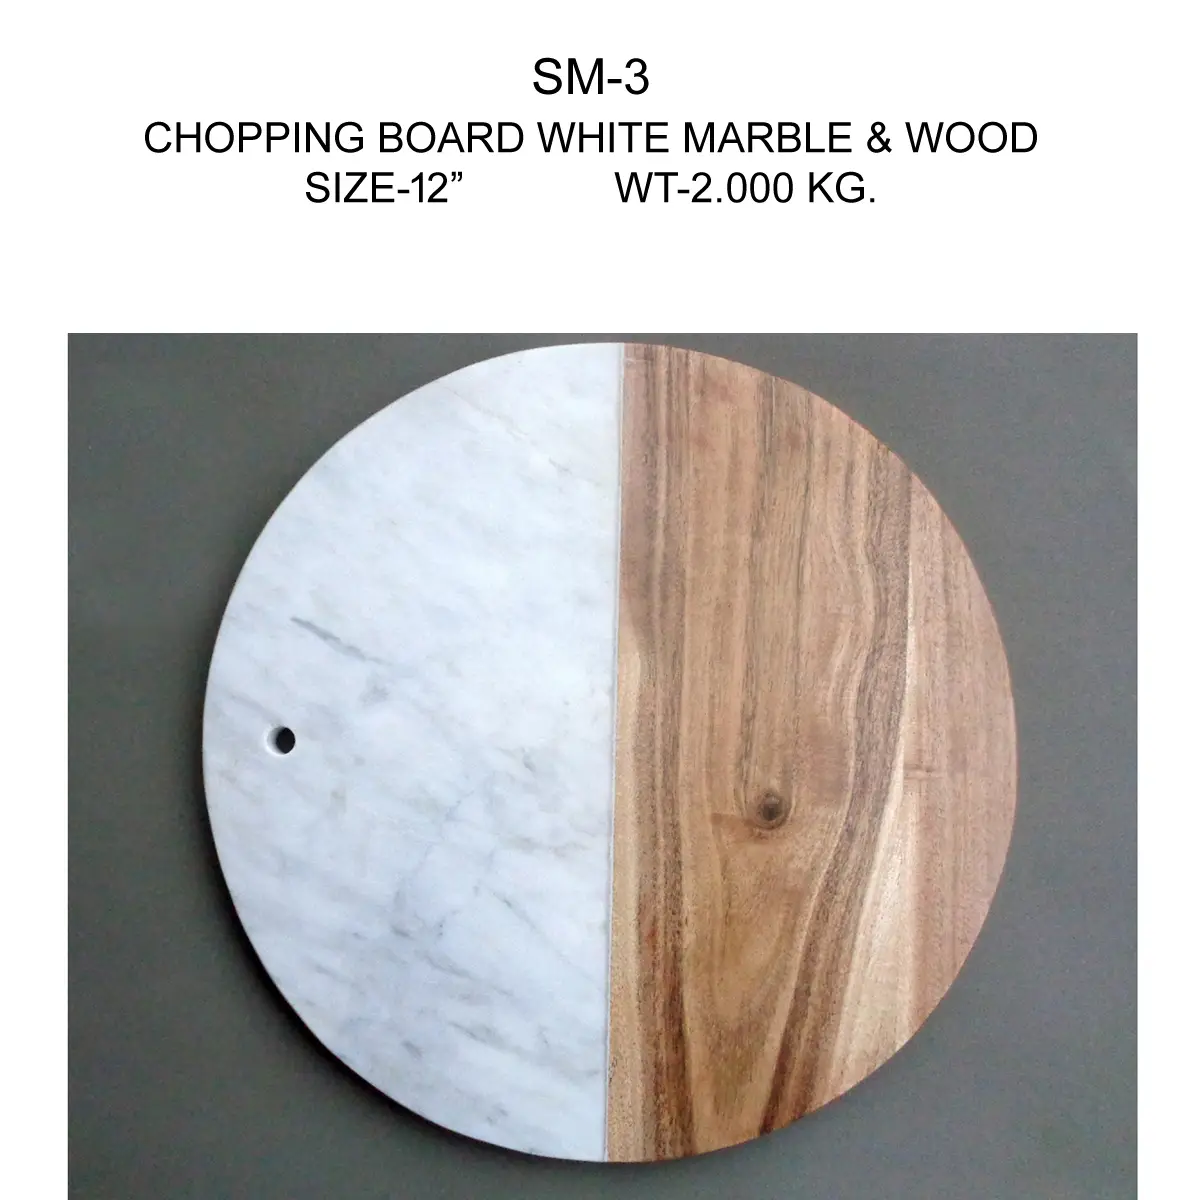 WOOD & MARBLE ROUND CHOPPING BOARD